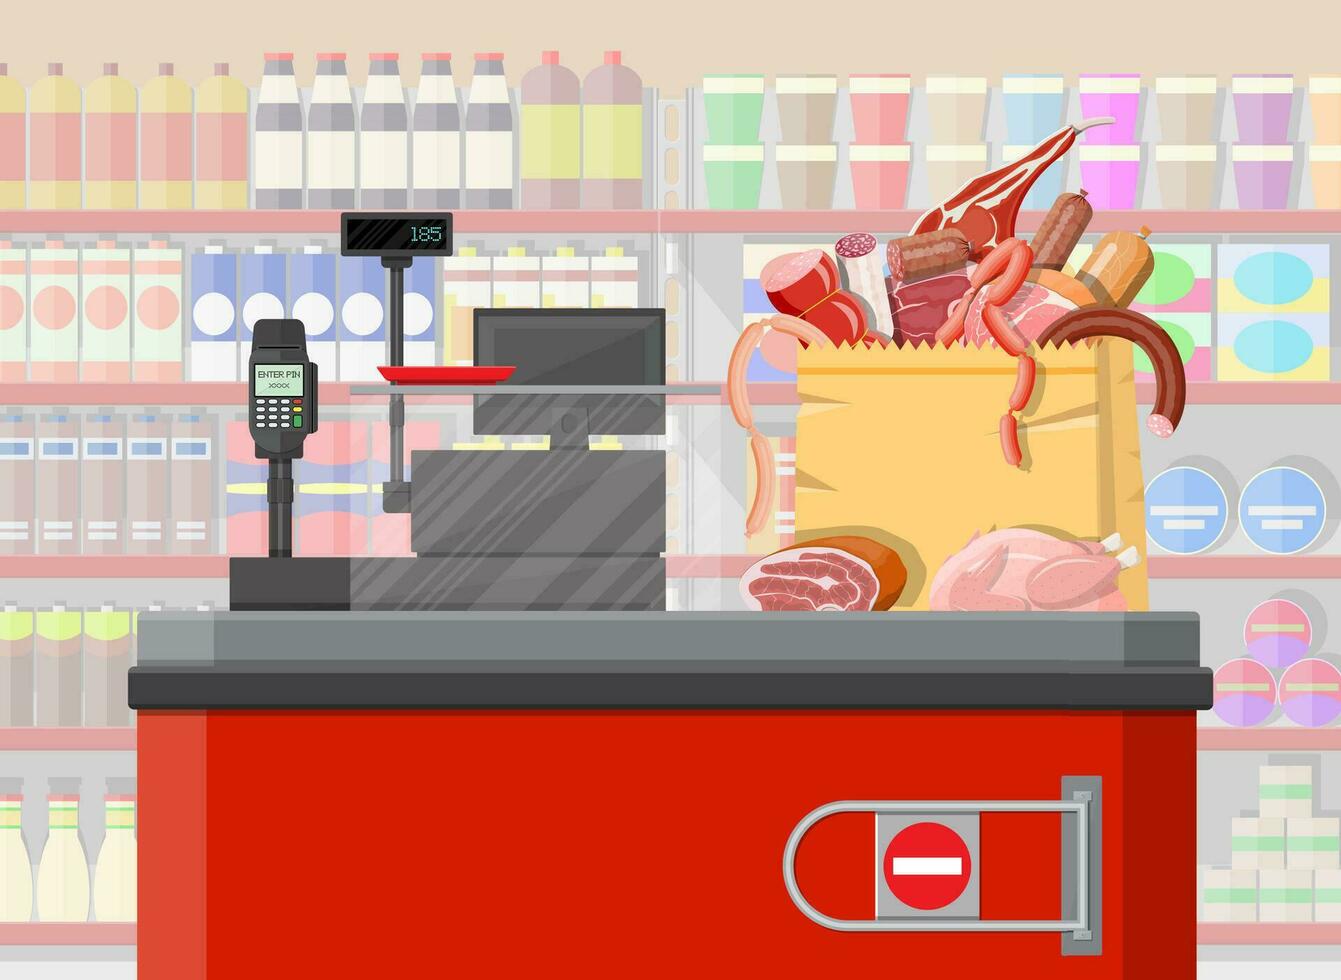 Supermarket store, retail groceries. Big shopping mall. Interior store inside. Checkout counter, cash machine, meat grocery, drinks, food, fruits and dairy products. Vector illustration in flat style